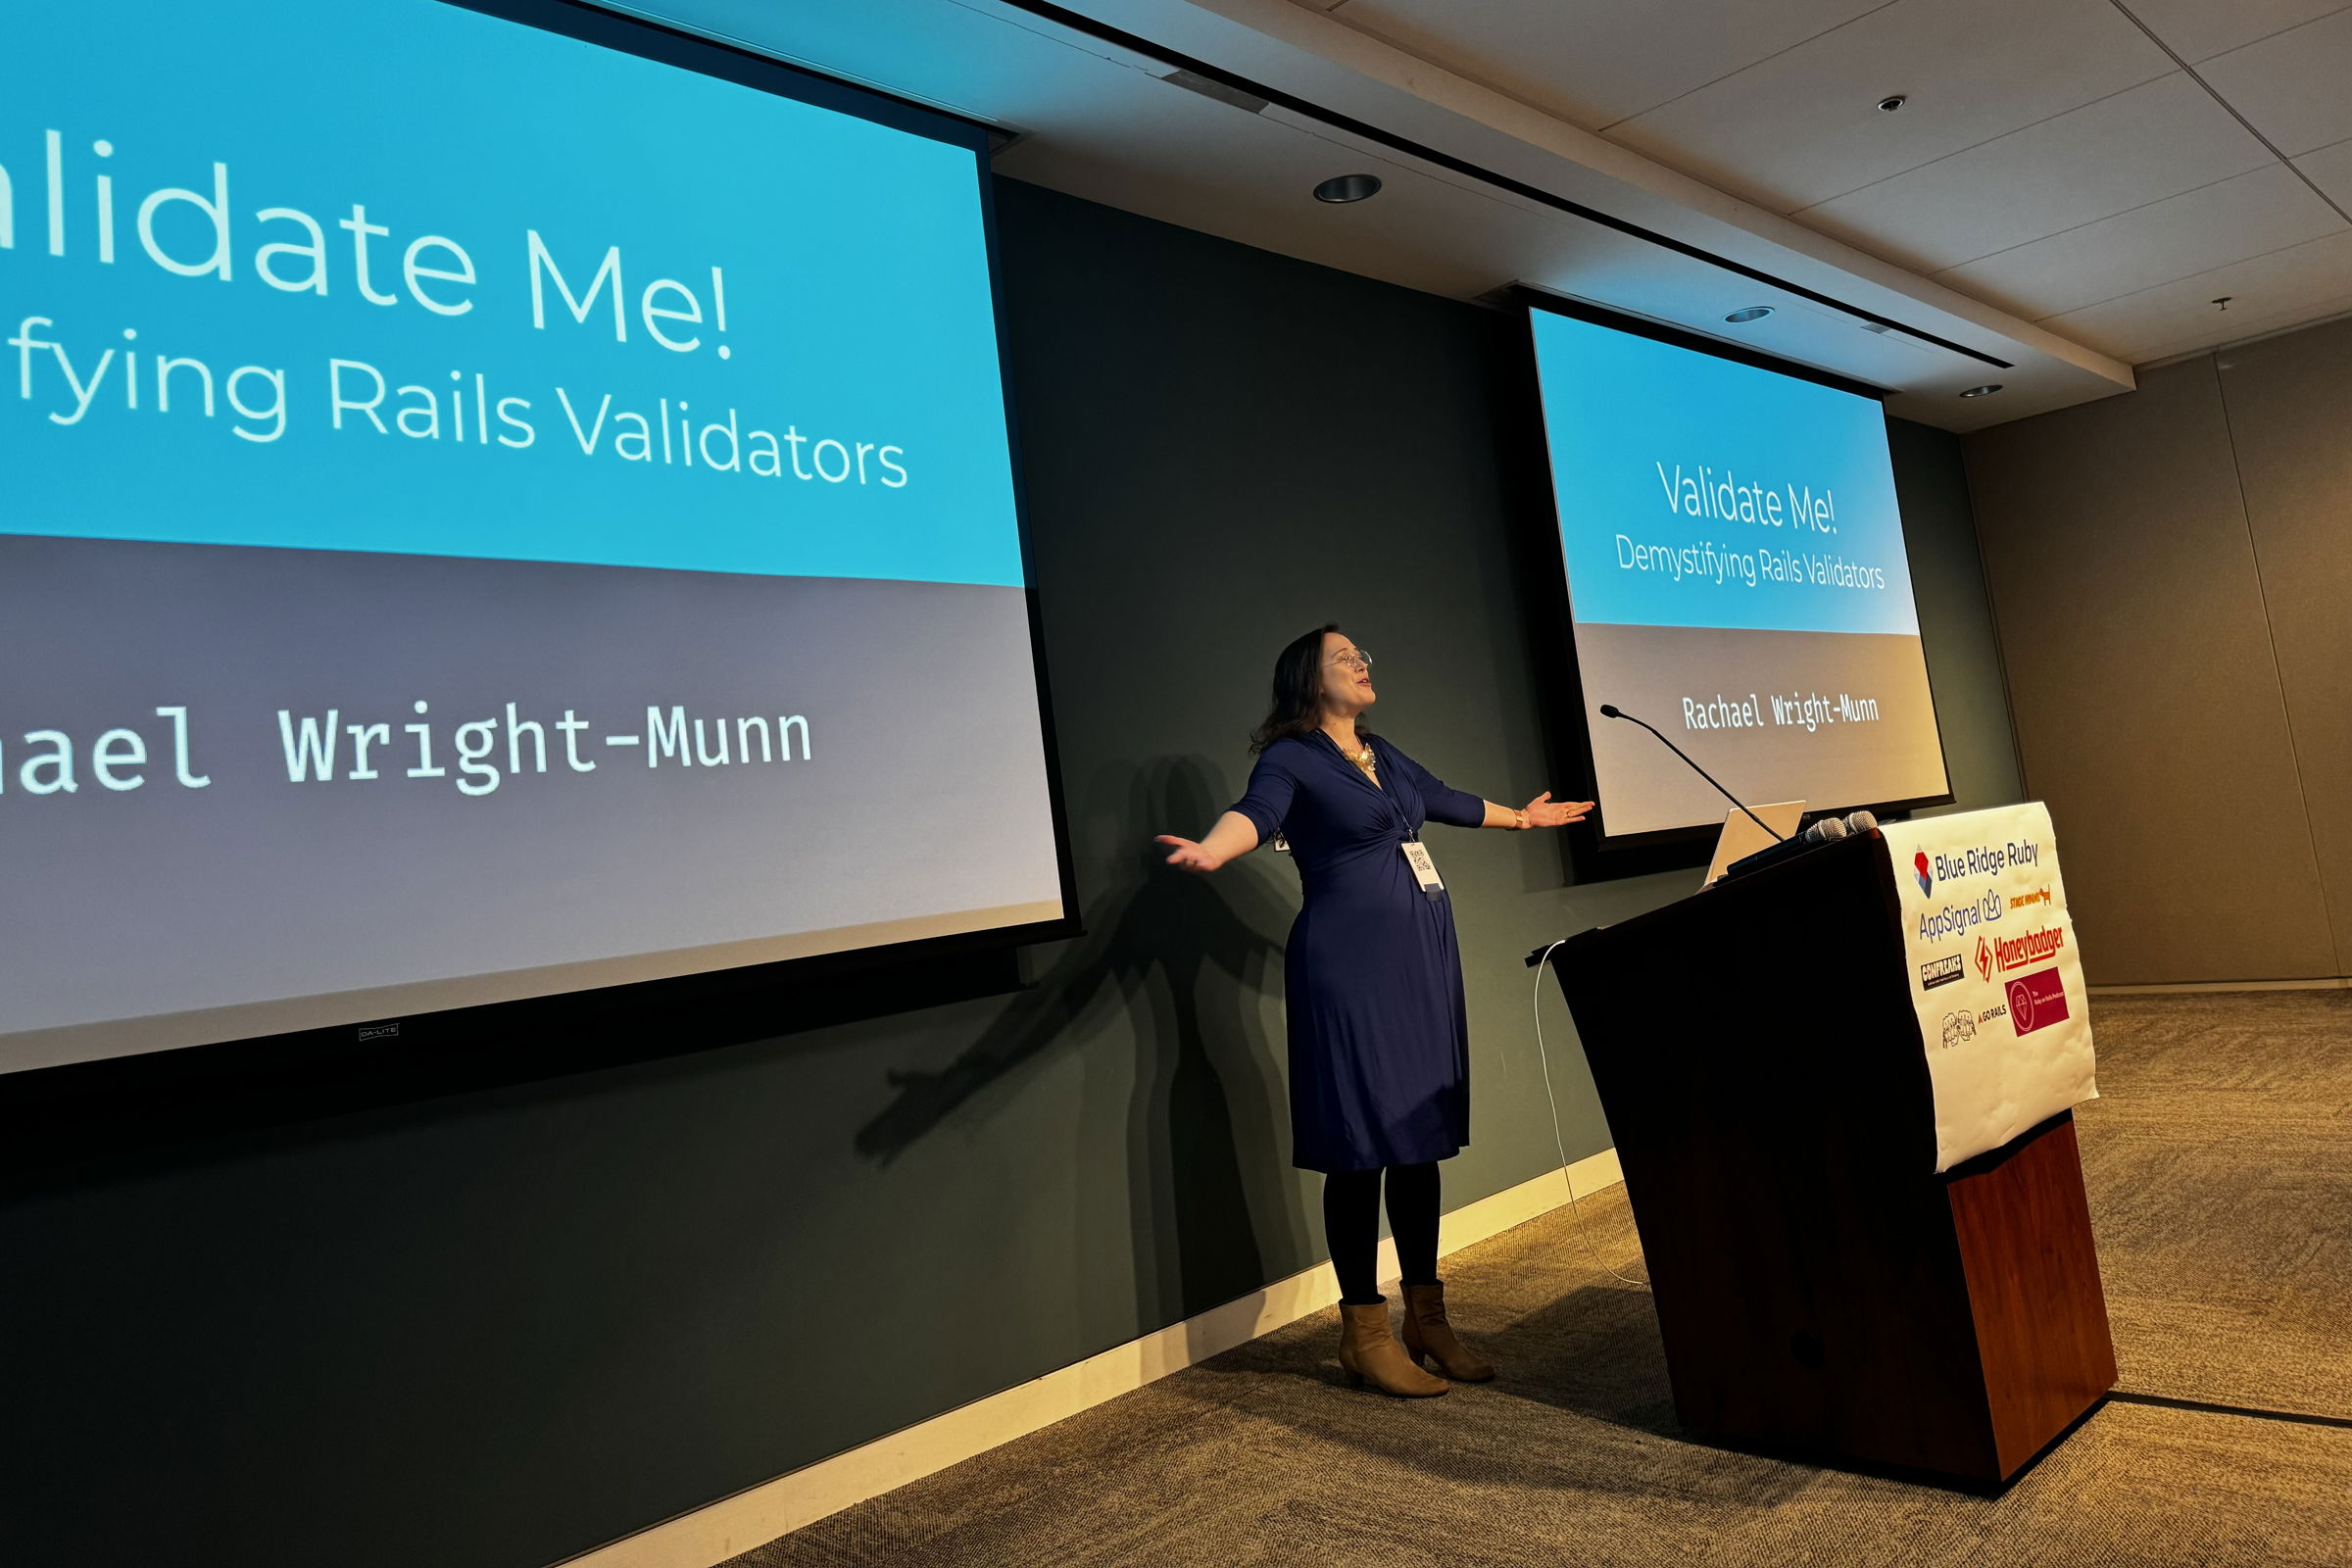 Rachael Wright-Munn presents on “Validate Me! Demystifying Rails Validators” at Blue Ridge Ruby conference, gesturing expressively while addressing the audience, with the presentation title displayed on the screen behind her.